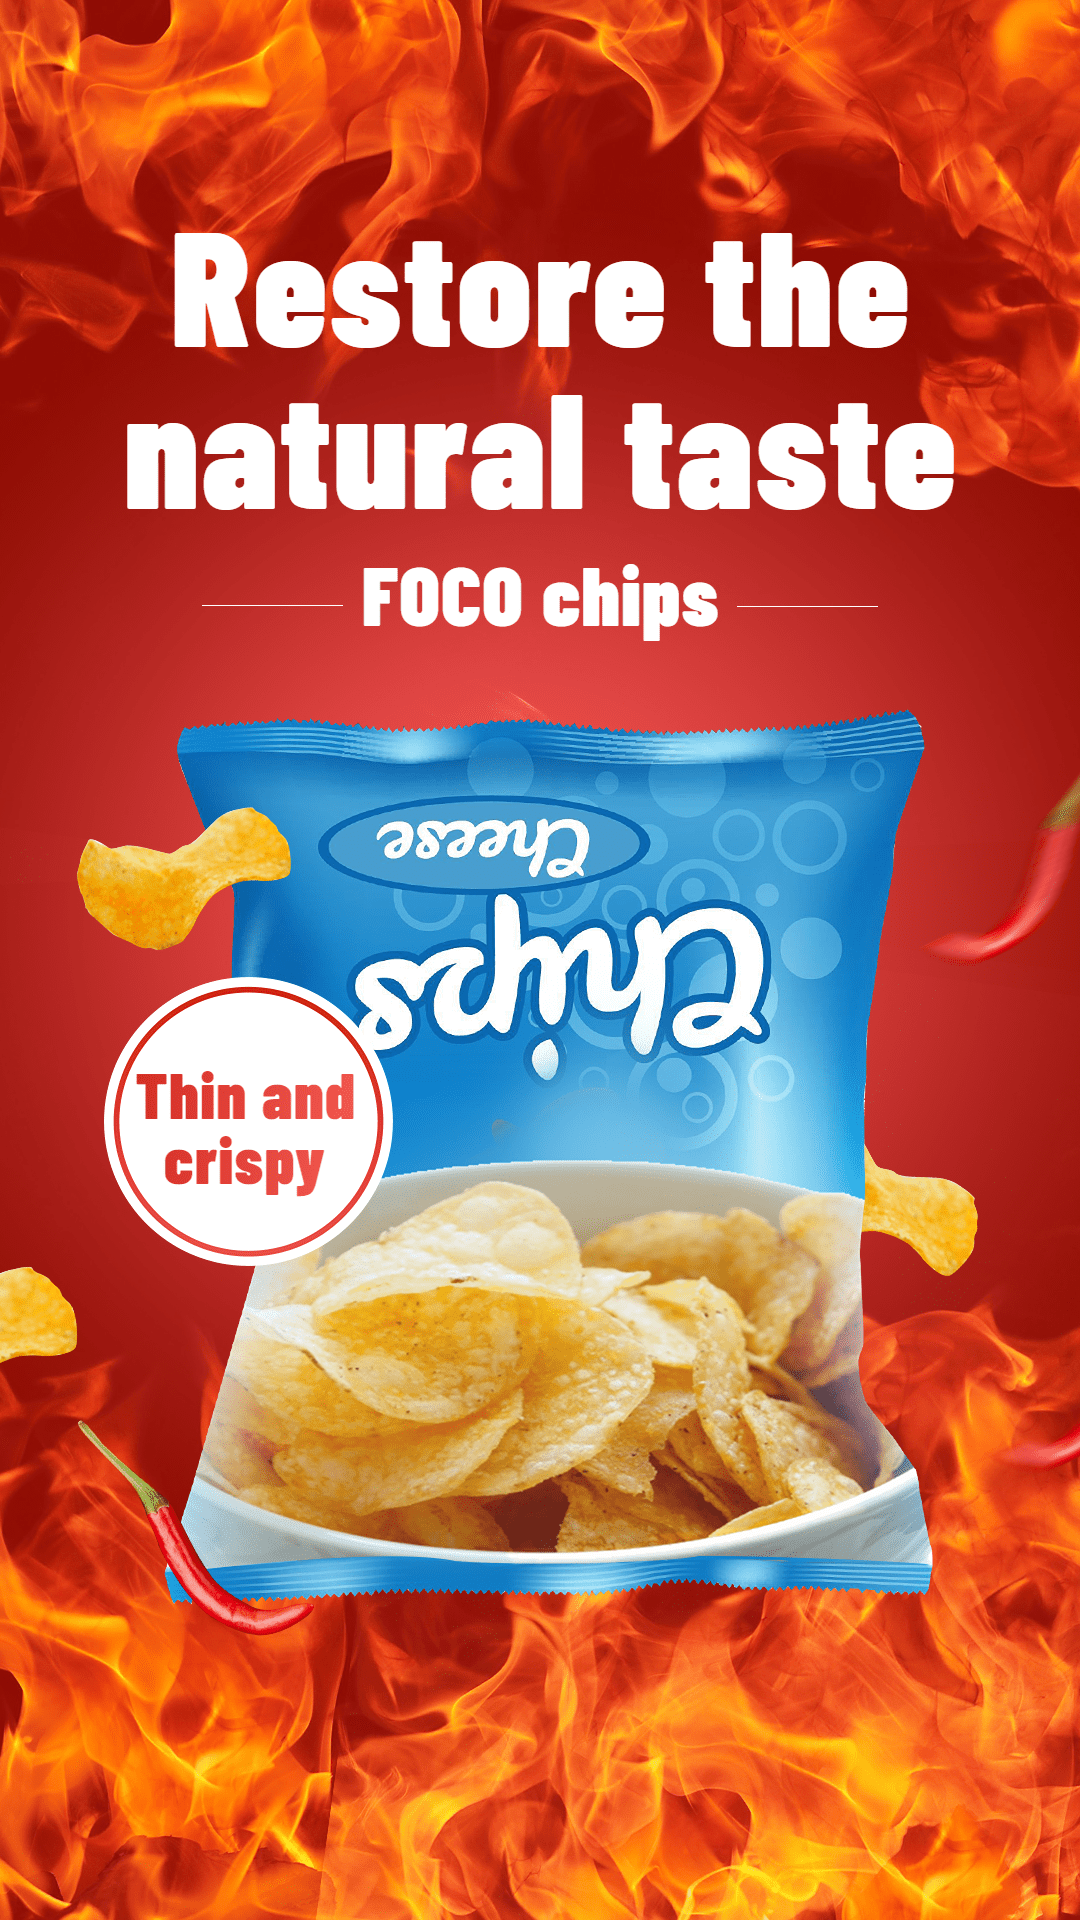 Flame Element Potato Chips Consumer Packaged Food Snacks Ecommerce Story